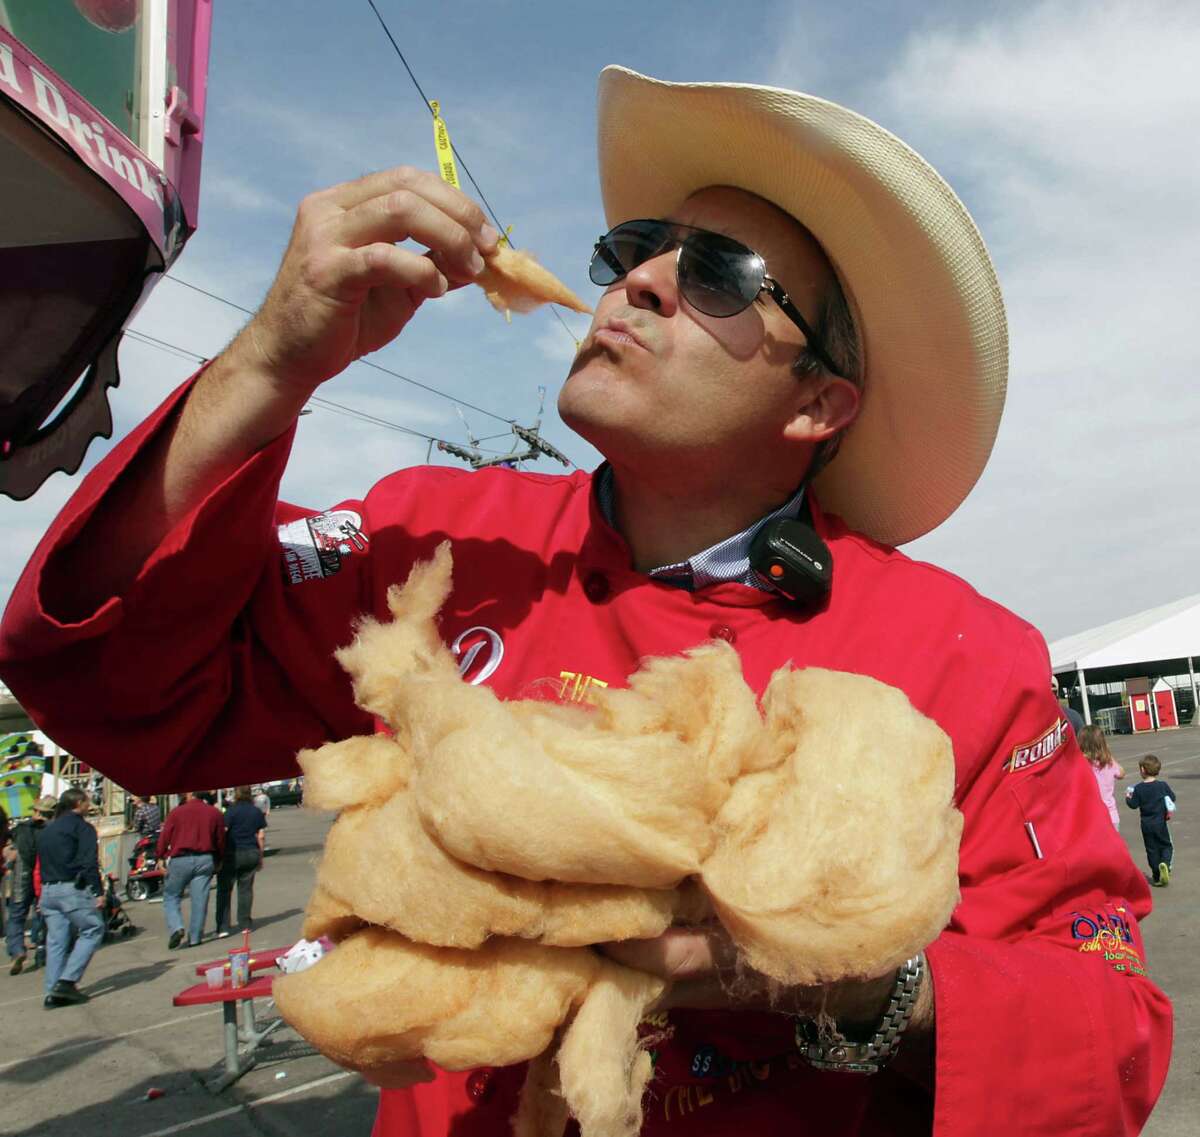 RSC's Dominic "The Midway Gourmet" Palmieri takes a bite of the Bacon Cotton Candy at the Houston Livestock Show and Rodeo Carnival Saturday, Feb. 23, 2013, in Houston. ( James Nielsen / Houston Chronicle )